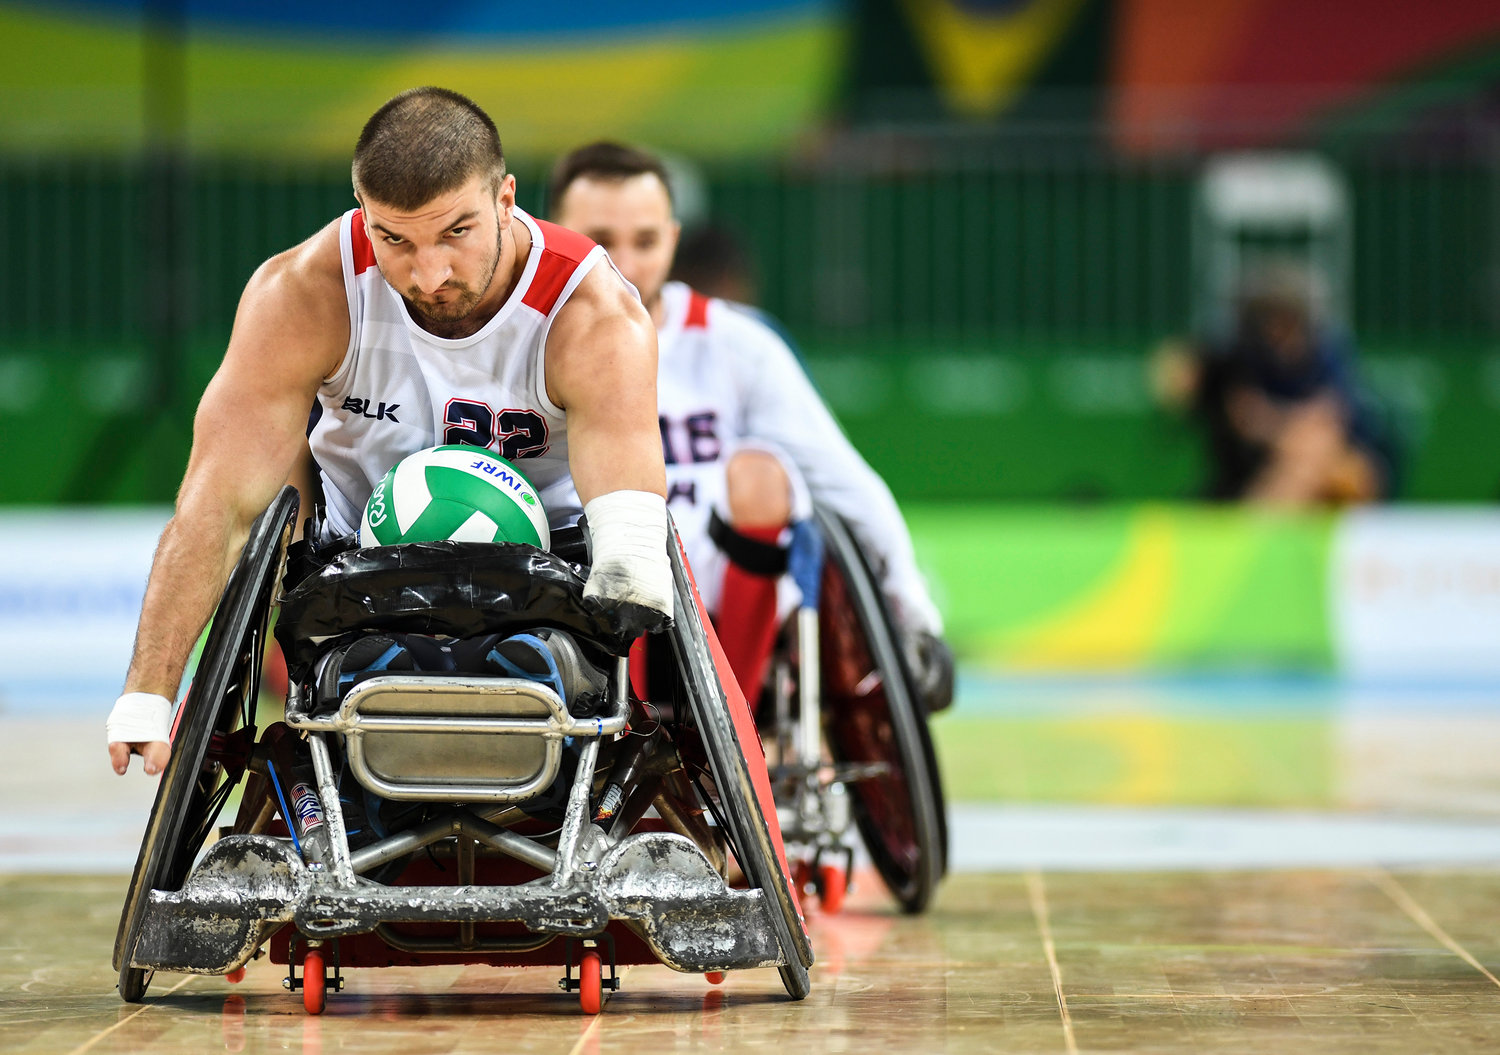 Kory Puderbaugh of United States competes during the Wheelchair Rugby match between the United States and France at the Carioca Arena 1 on day 7 of the Rio 2016 Paralympic Games in Rio de Janeiro, Brazil.